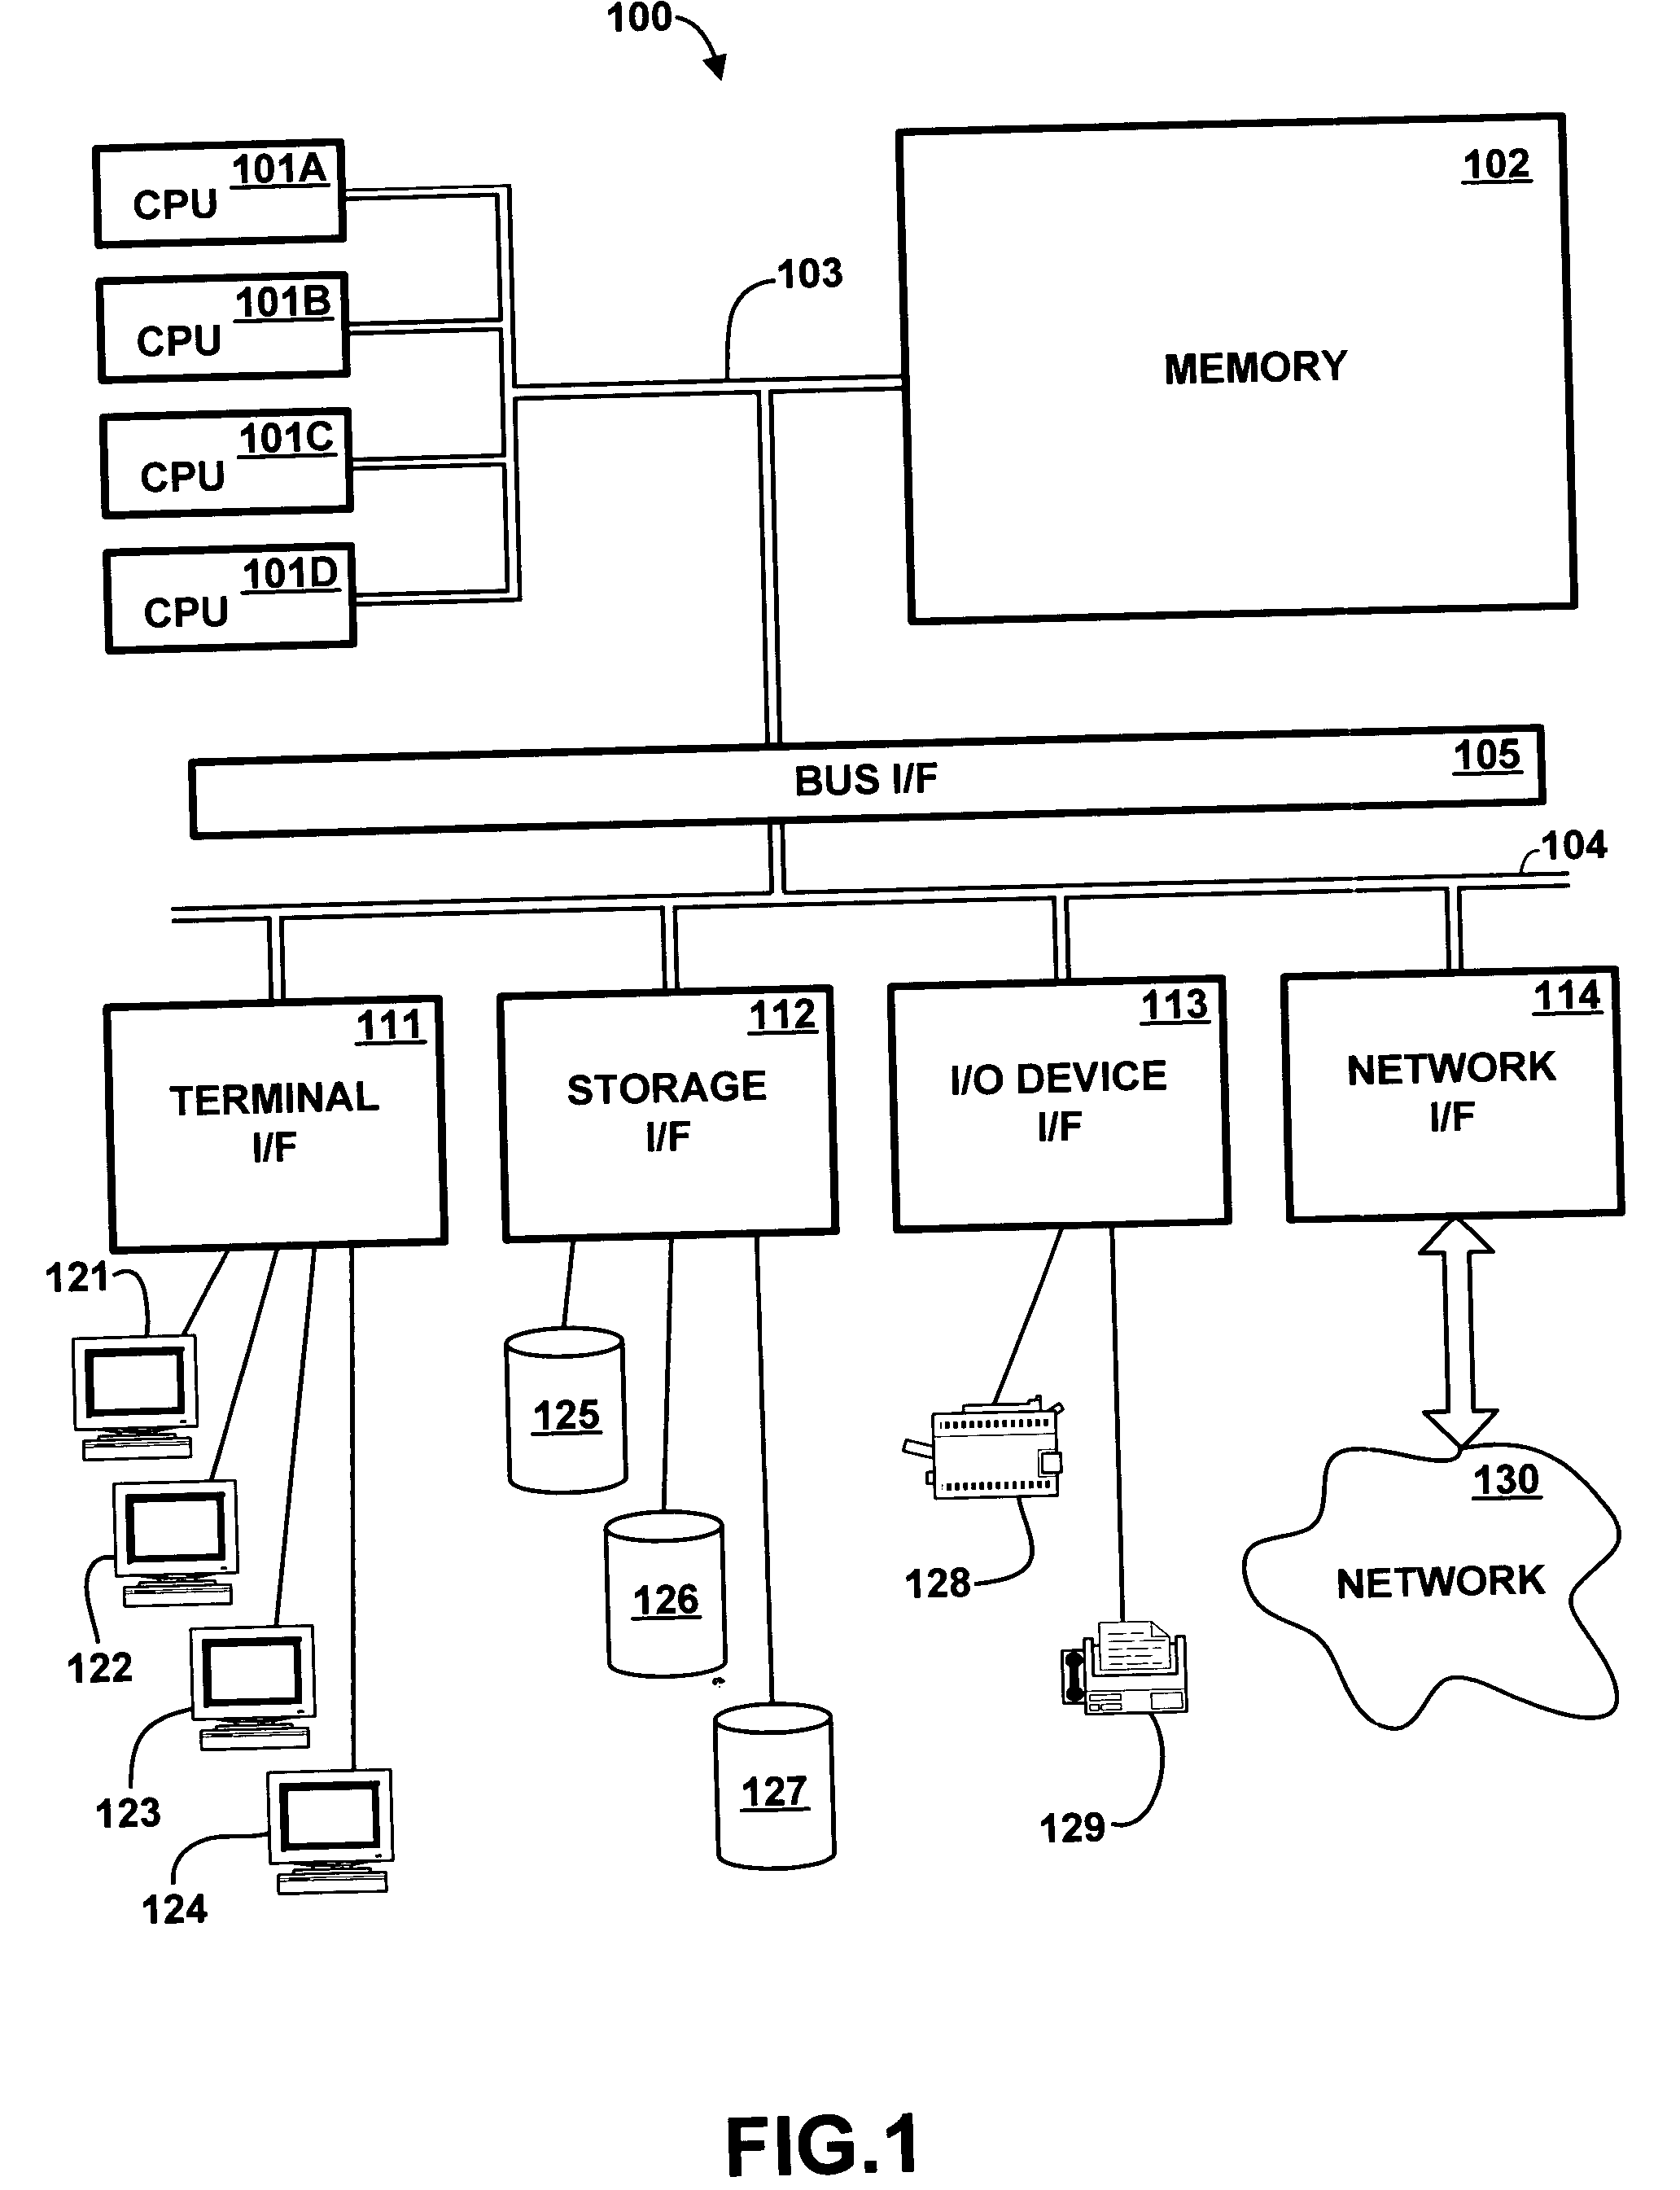 Apparatus and method for pre-fetching page data using segment table data